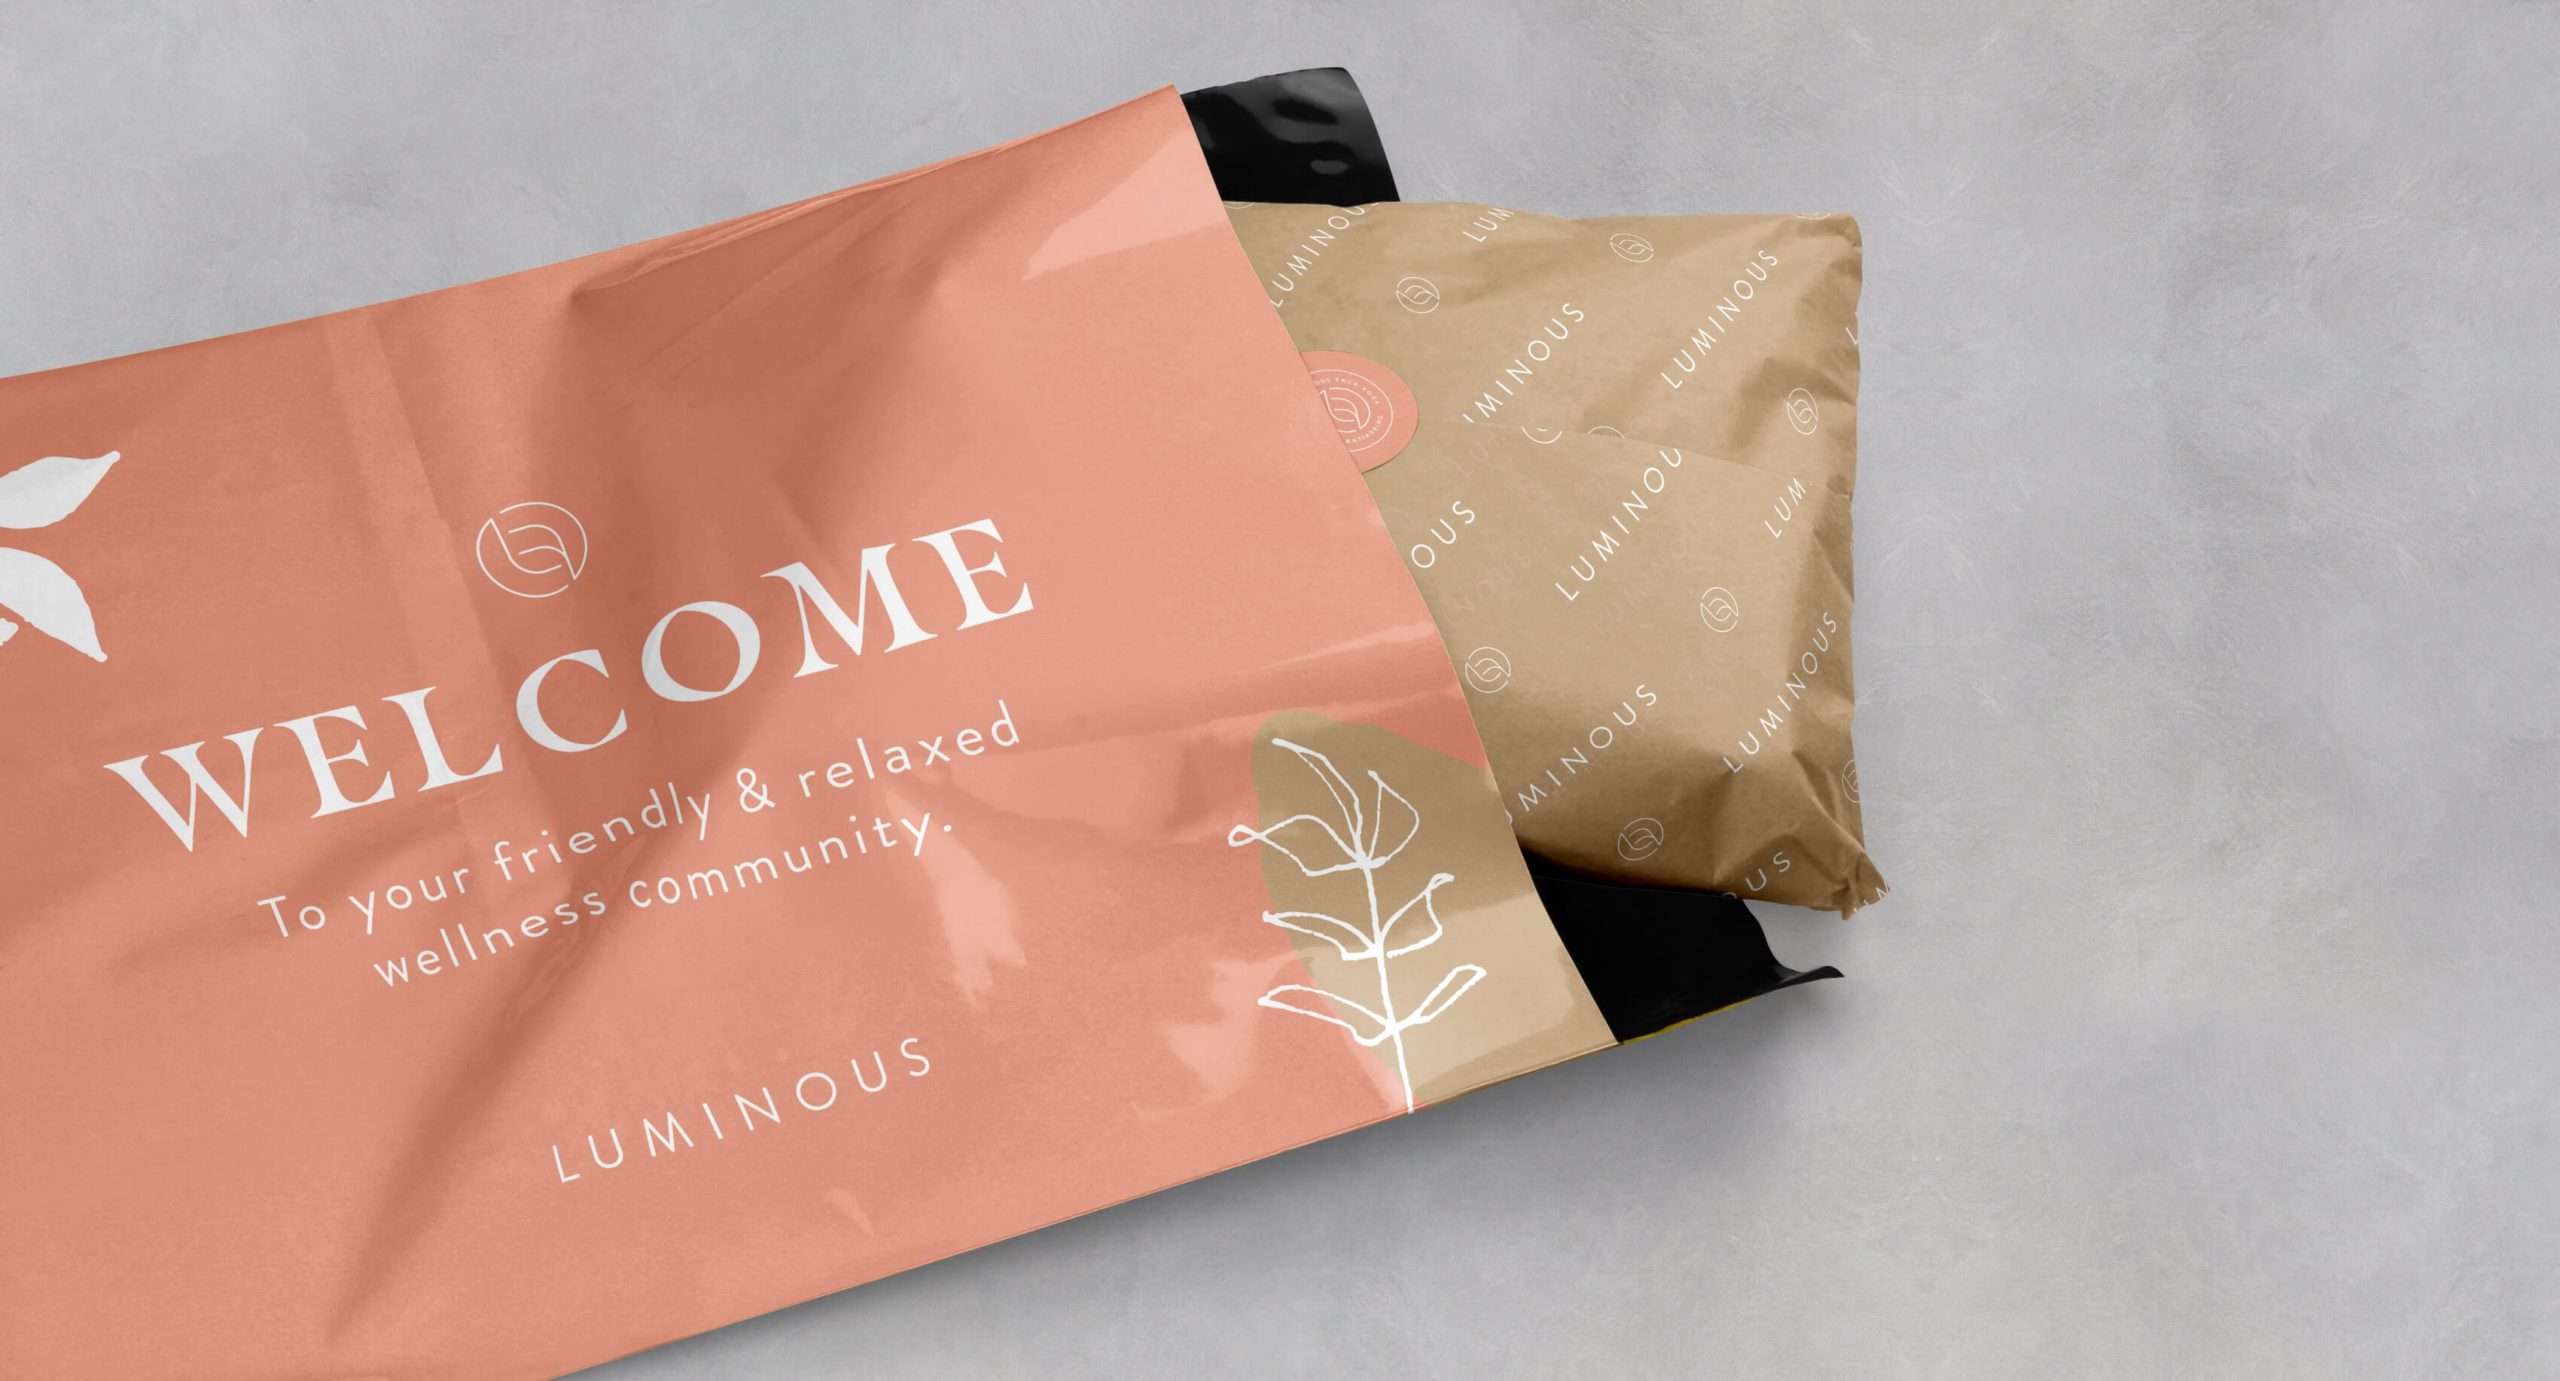 Branded Welcome packaging envelope with Lumious products including face roller and gua sha tool